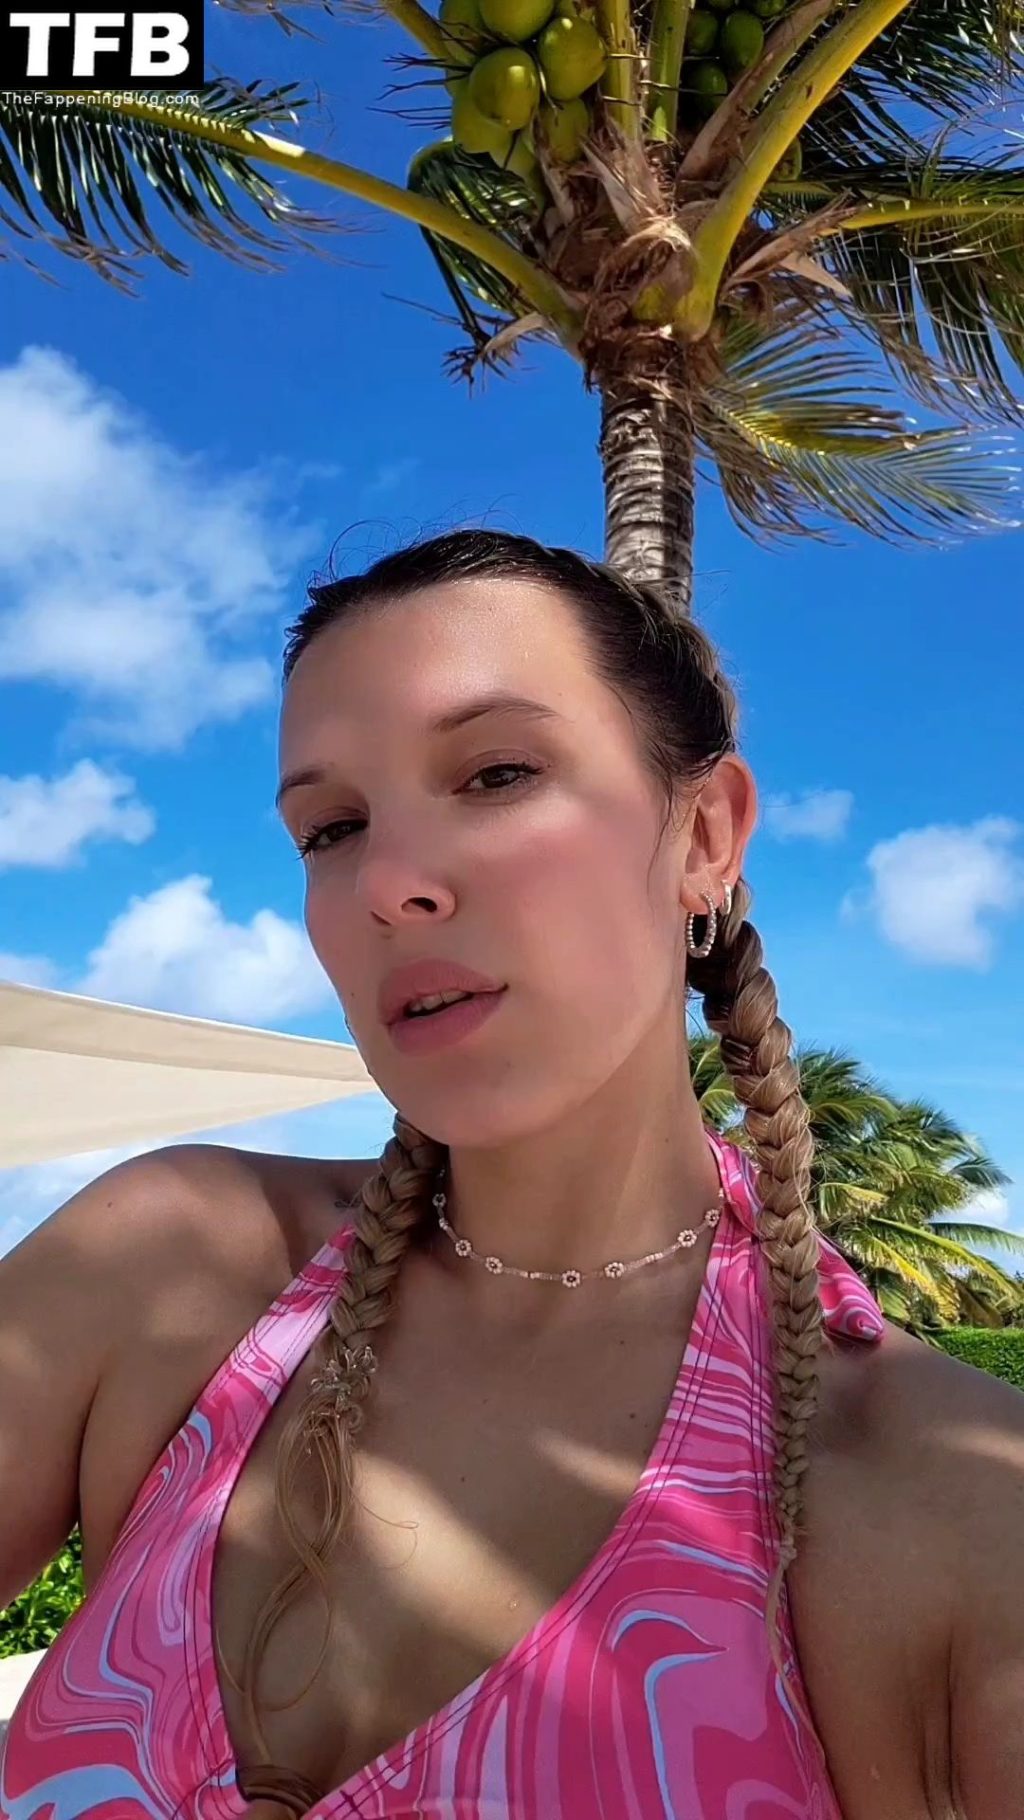 Millie Bobby Brown Nude Photos Videos Thefappening